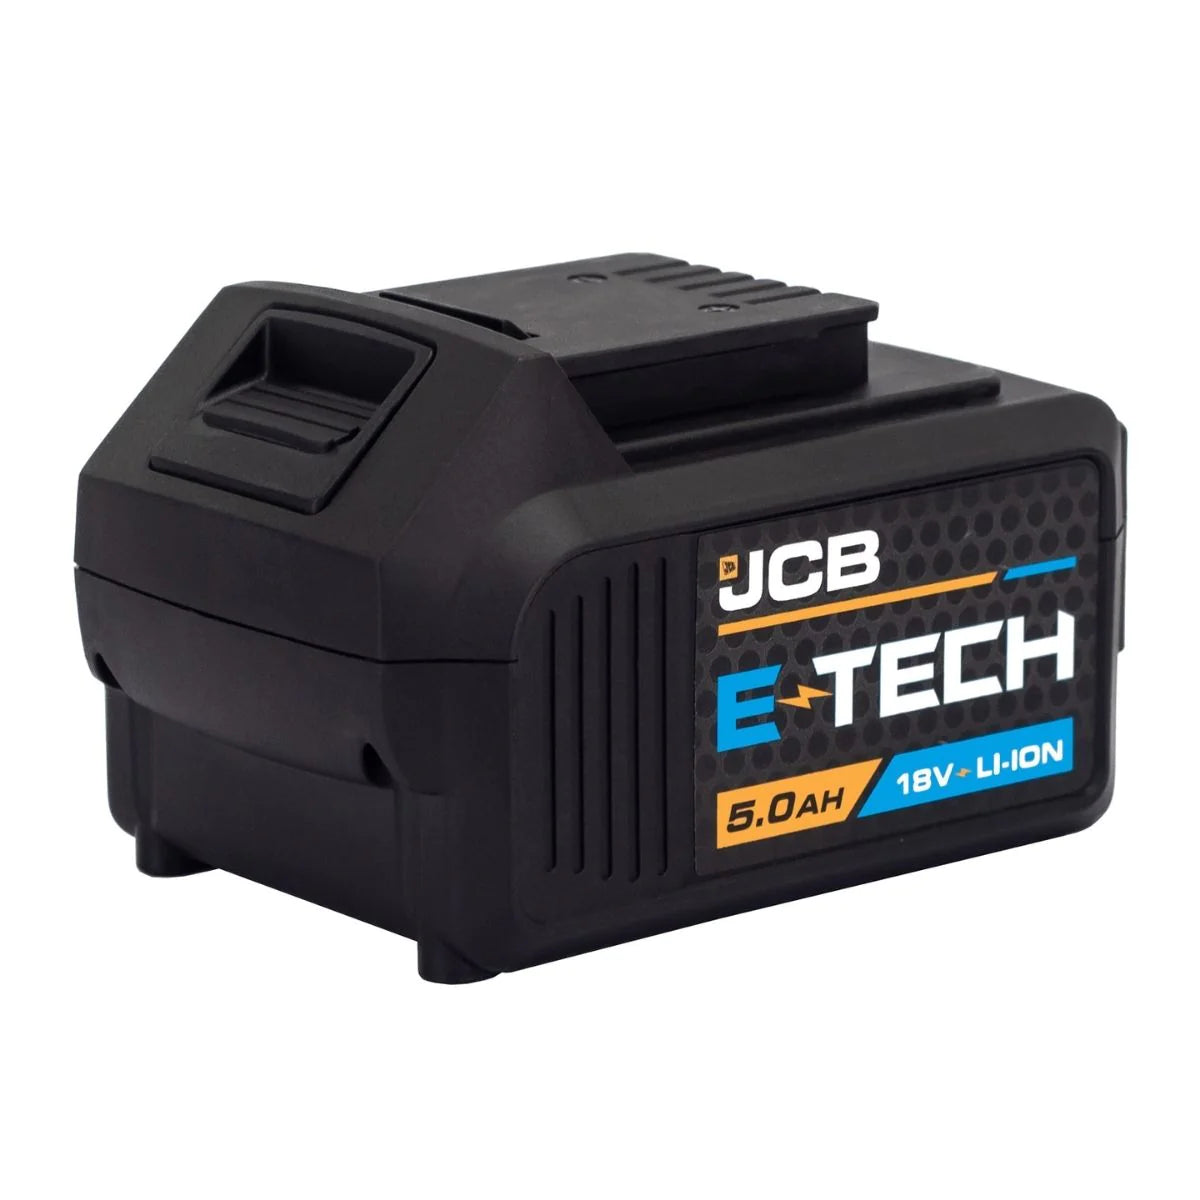 JCB 21-18BL-TPK-5 18V Brushless Combi Drill, Impact Twinpack with 2 x 5.0Ah Batteries, Charger & Bag